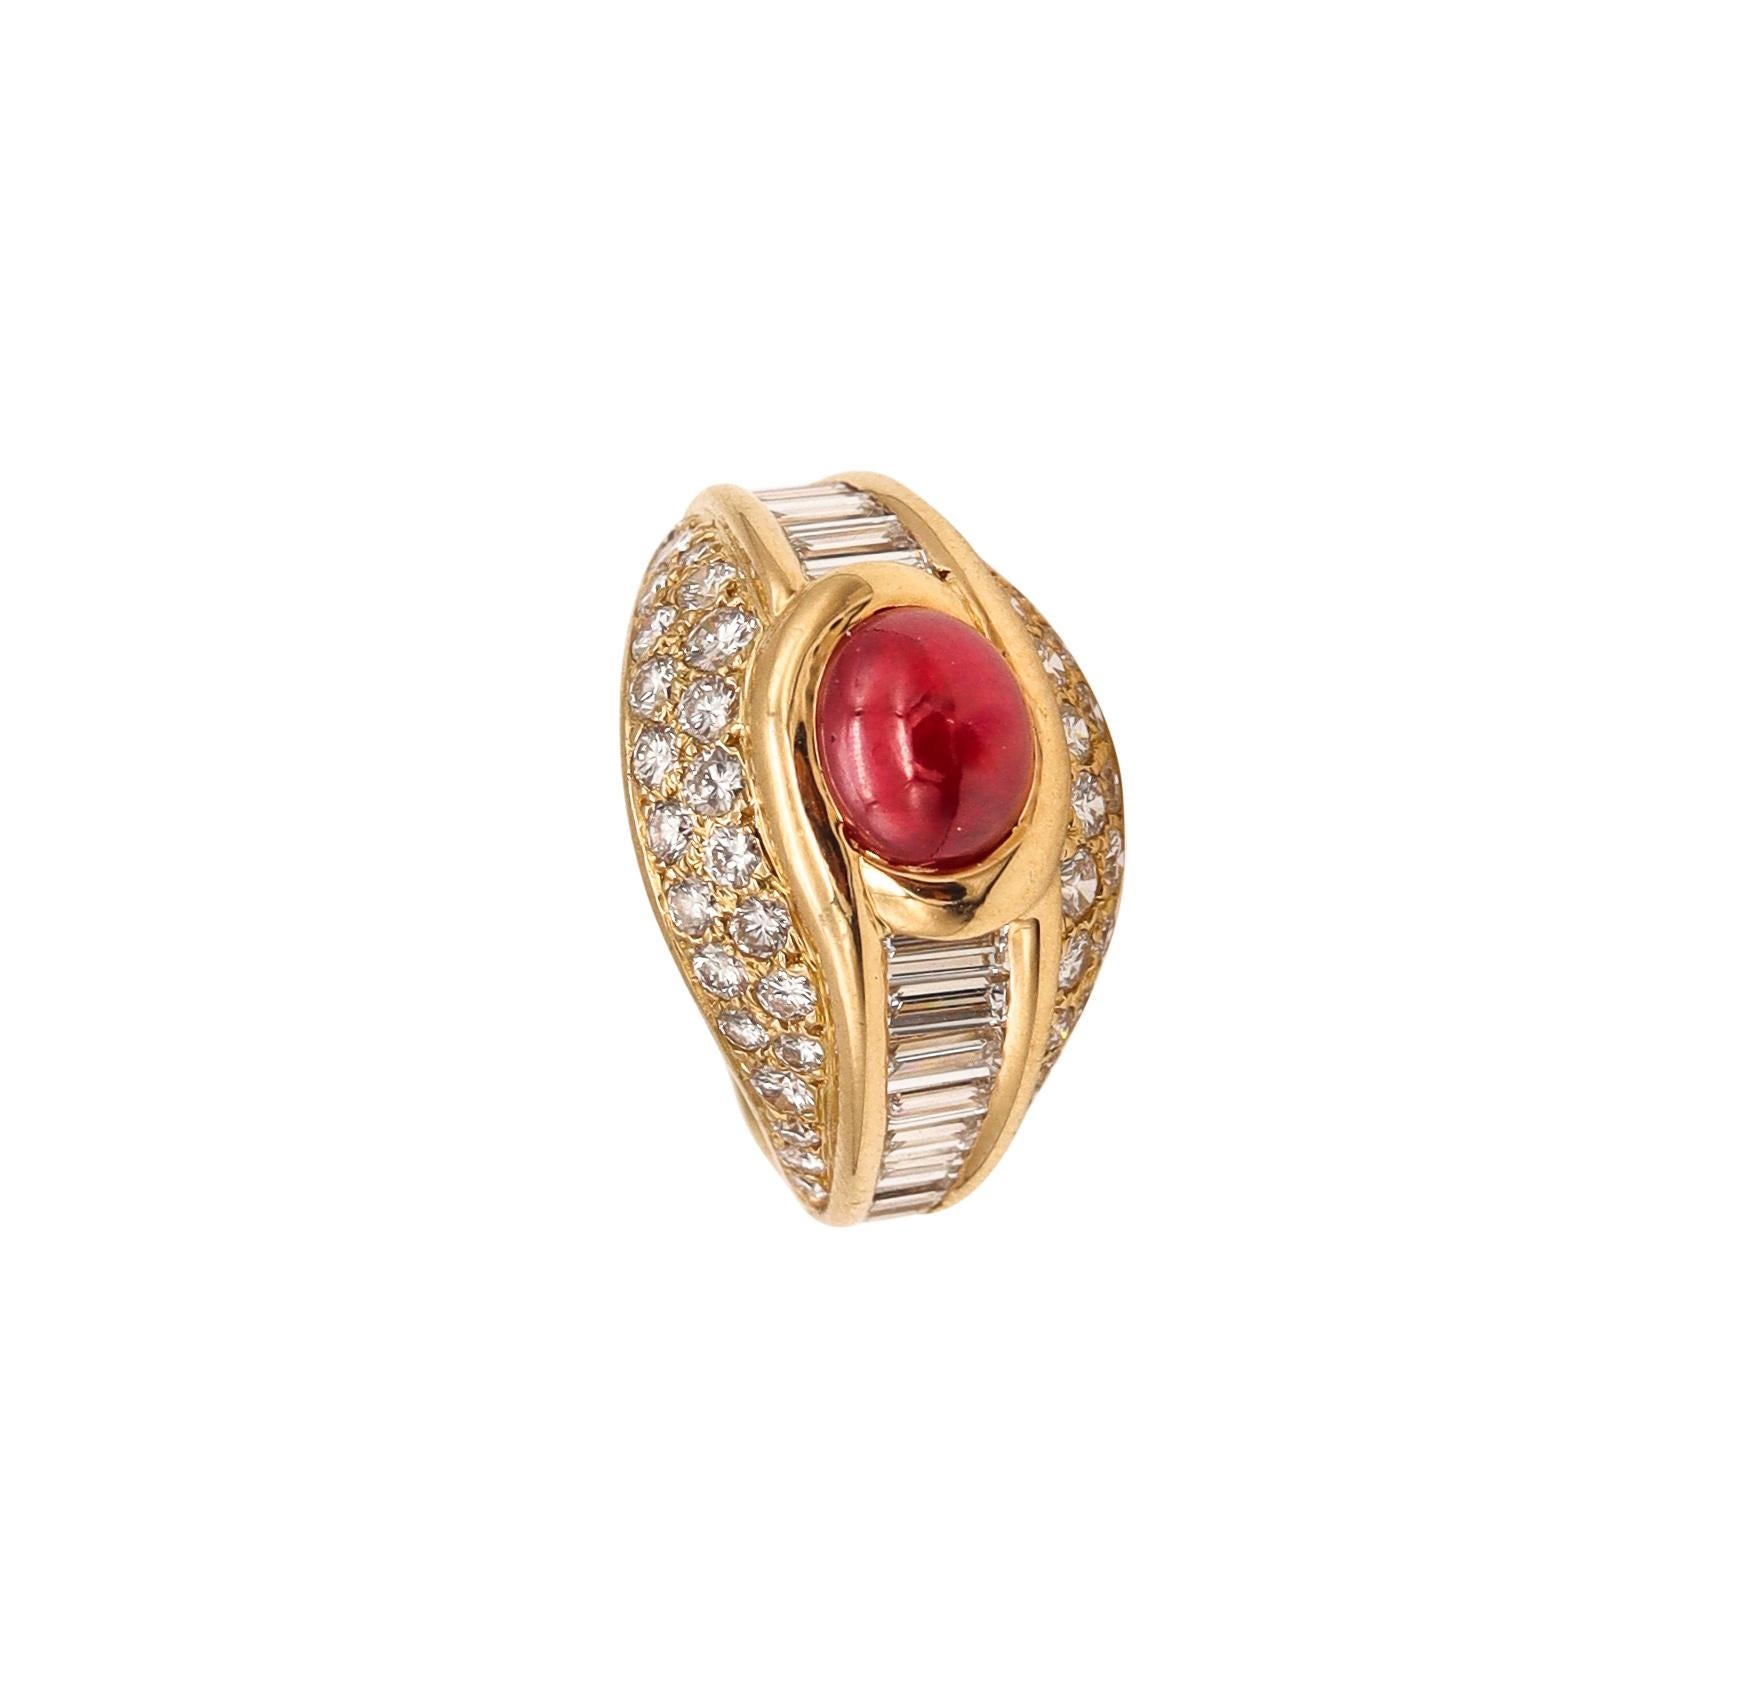 Cartier Paris Cocktail Ring in 18Kt Yellow Gold 4.49 Cts Burmese Ruby Diamonds For Sale 2